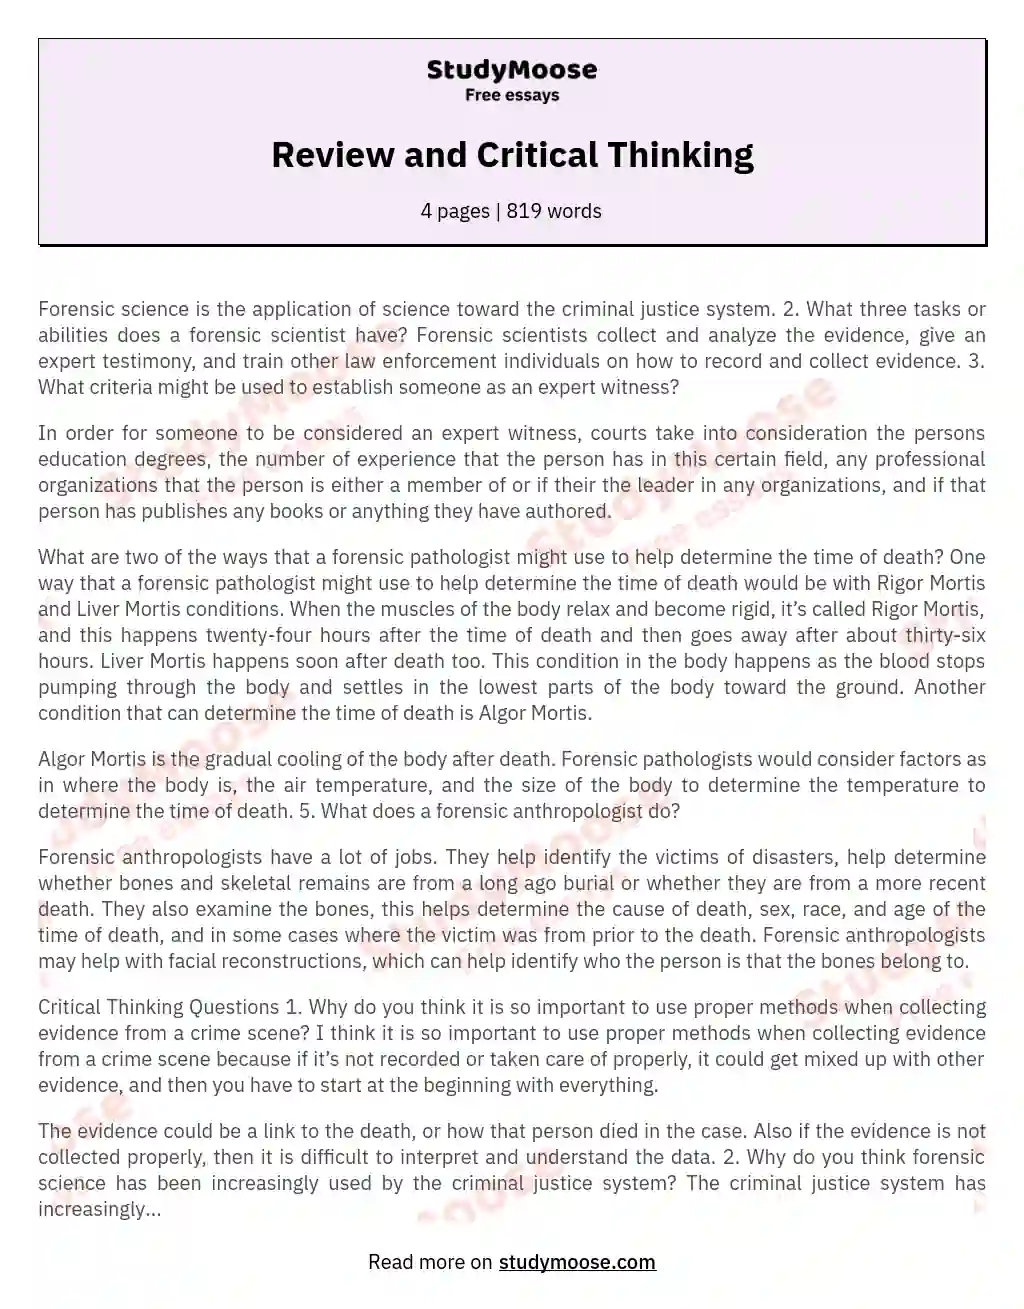 Review and Critical Thinking essay